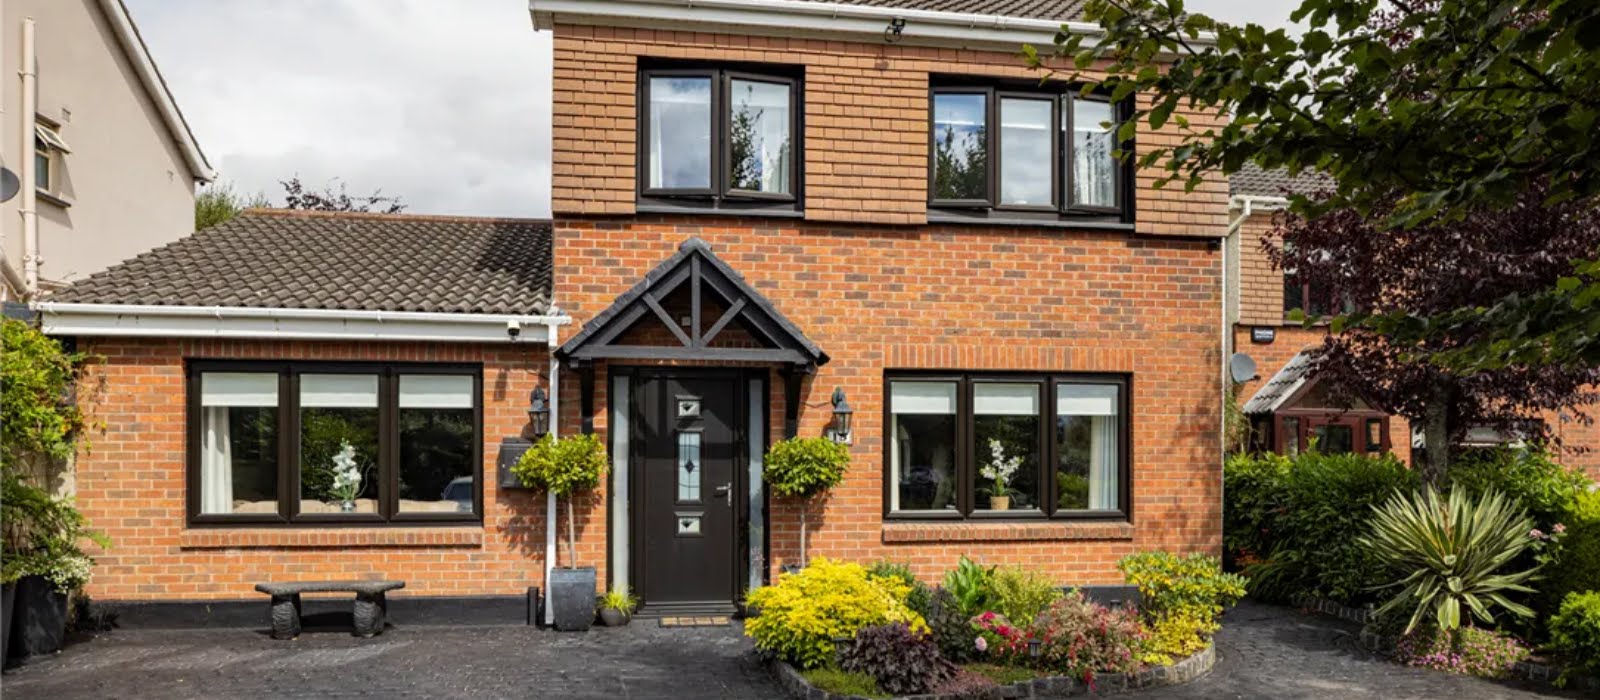 This modern four-bedroom red brick is on the market for €650,000